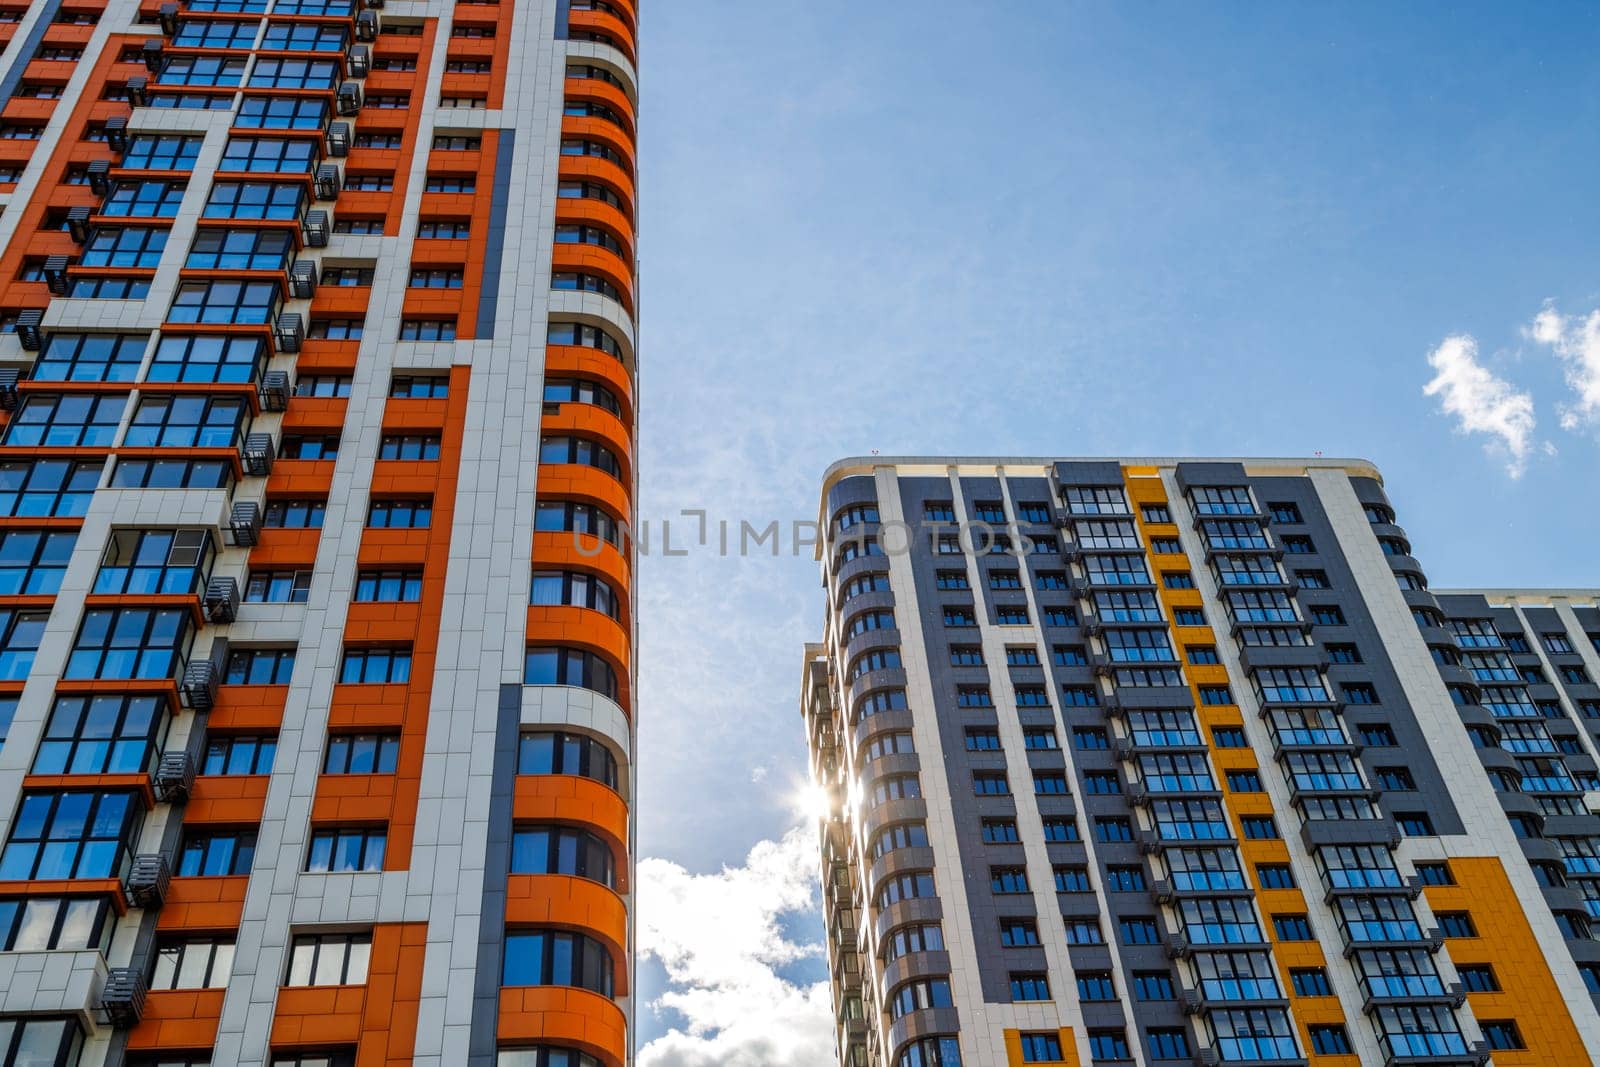 freshly built high rise apartment buildings on blue sky background with white clouds by z1b